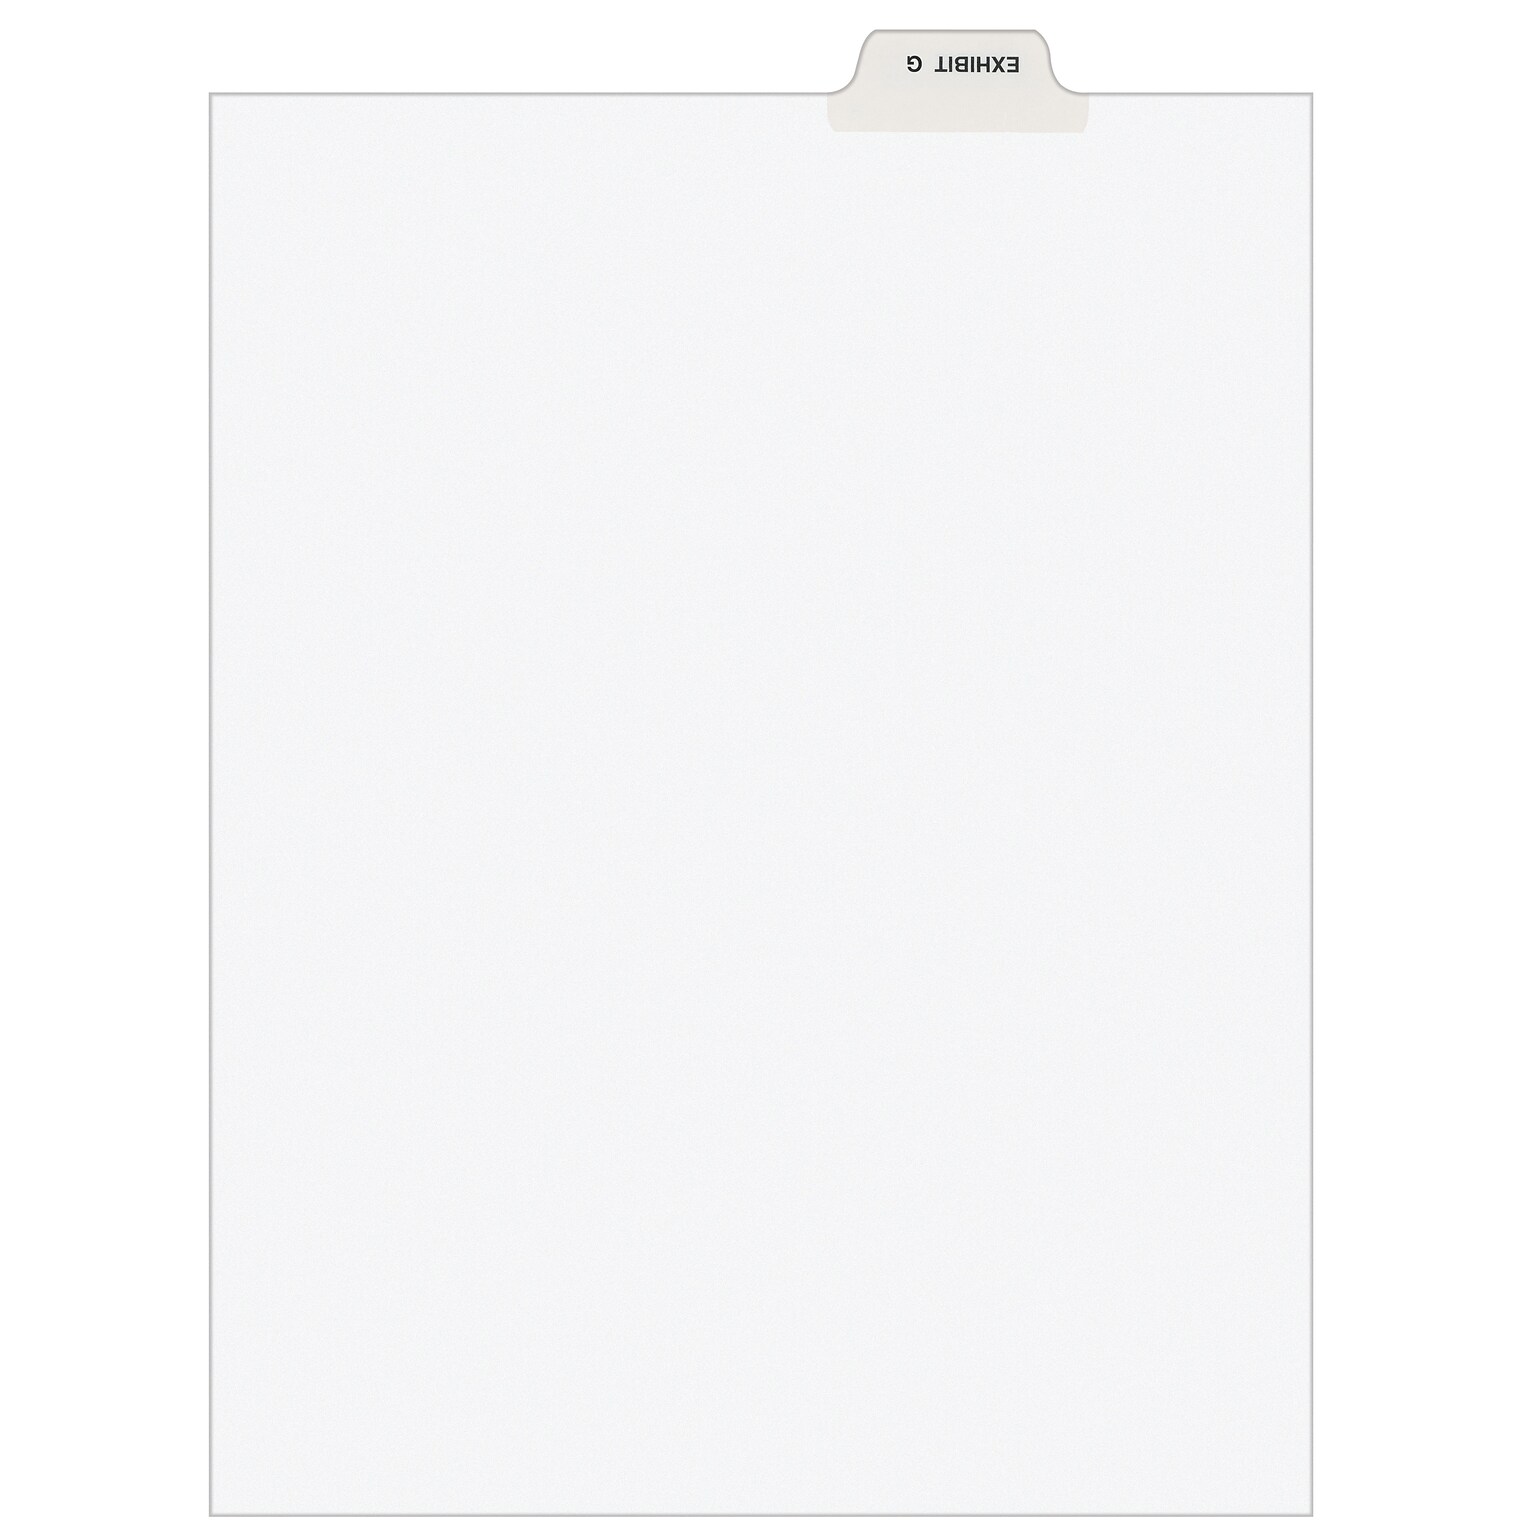 Avery Legal Pre-Printed Paper Dividers, Bottom Tab EXHIBIT G, White, Avery Style, Letter Size, 25/Pack (11946)